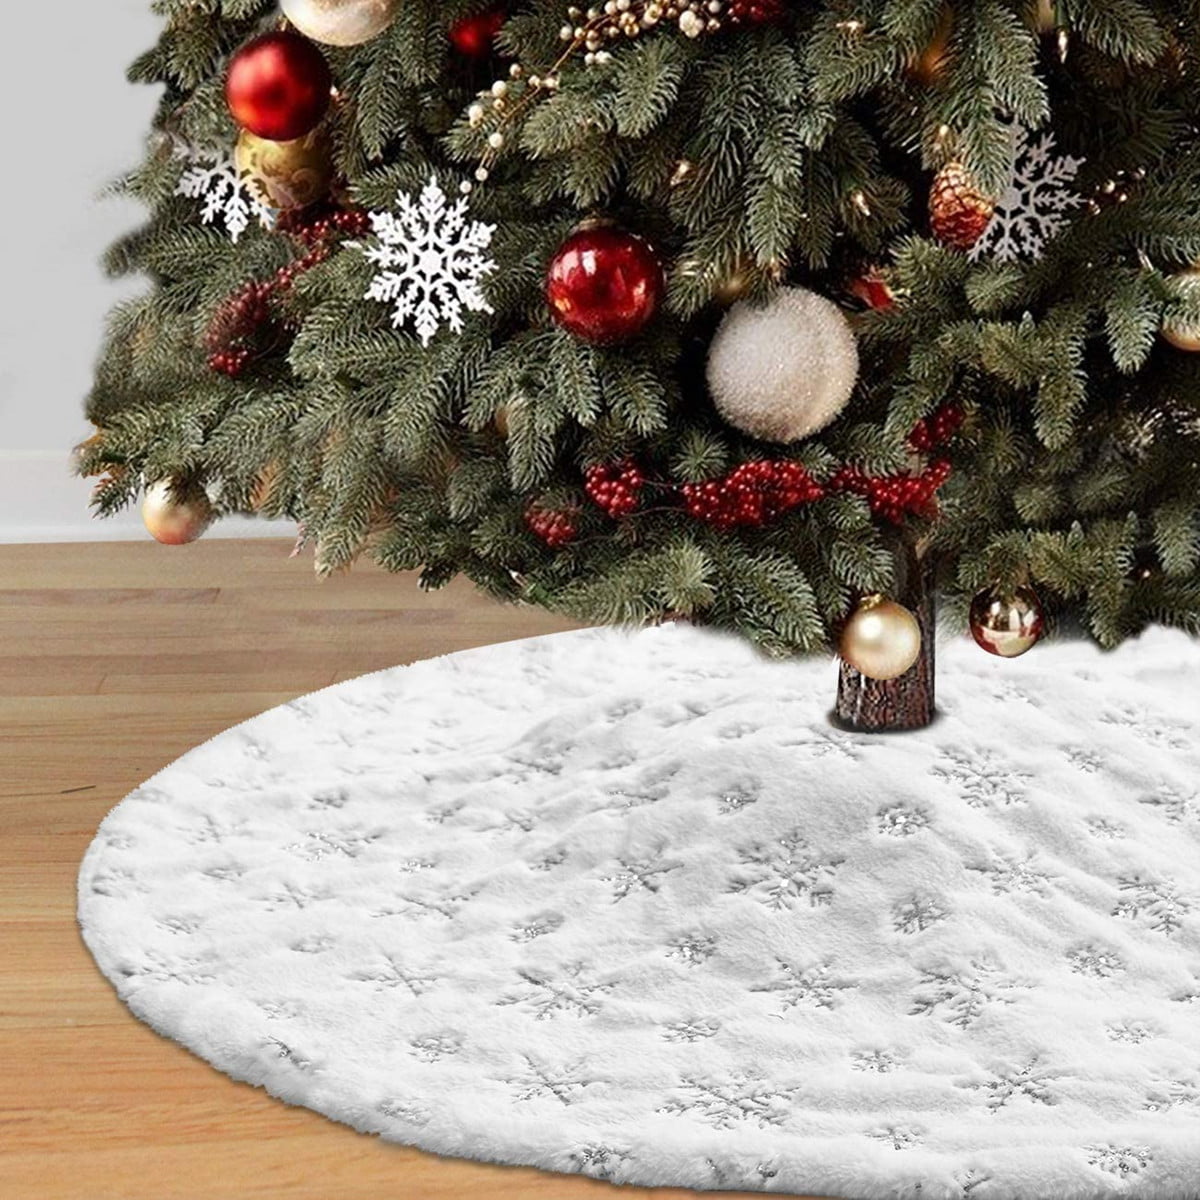 Faux Fur Christmas Tree Skirt Reusable Xmas Christmas Tree Skirt Mat with Double Layers for Christmas Holiday New Year Home Party Decorations 36 inches White Fluffy Plush with Snowflake Tree Skirt 